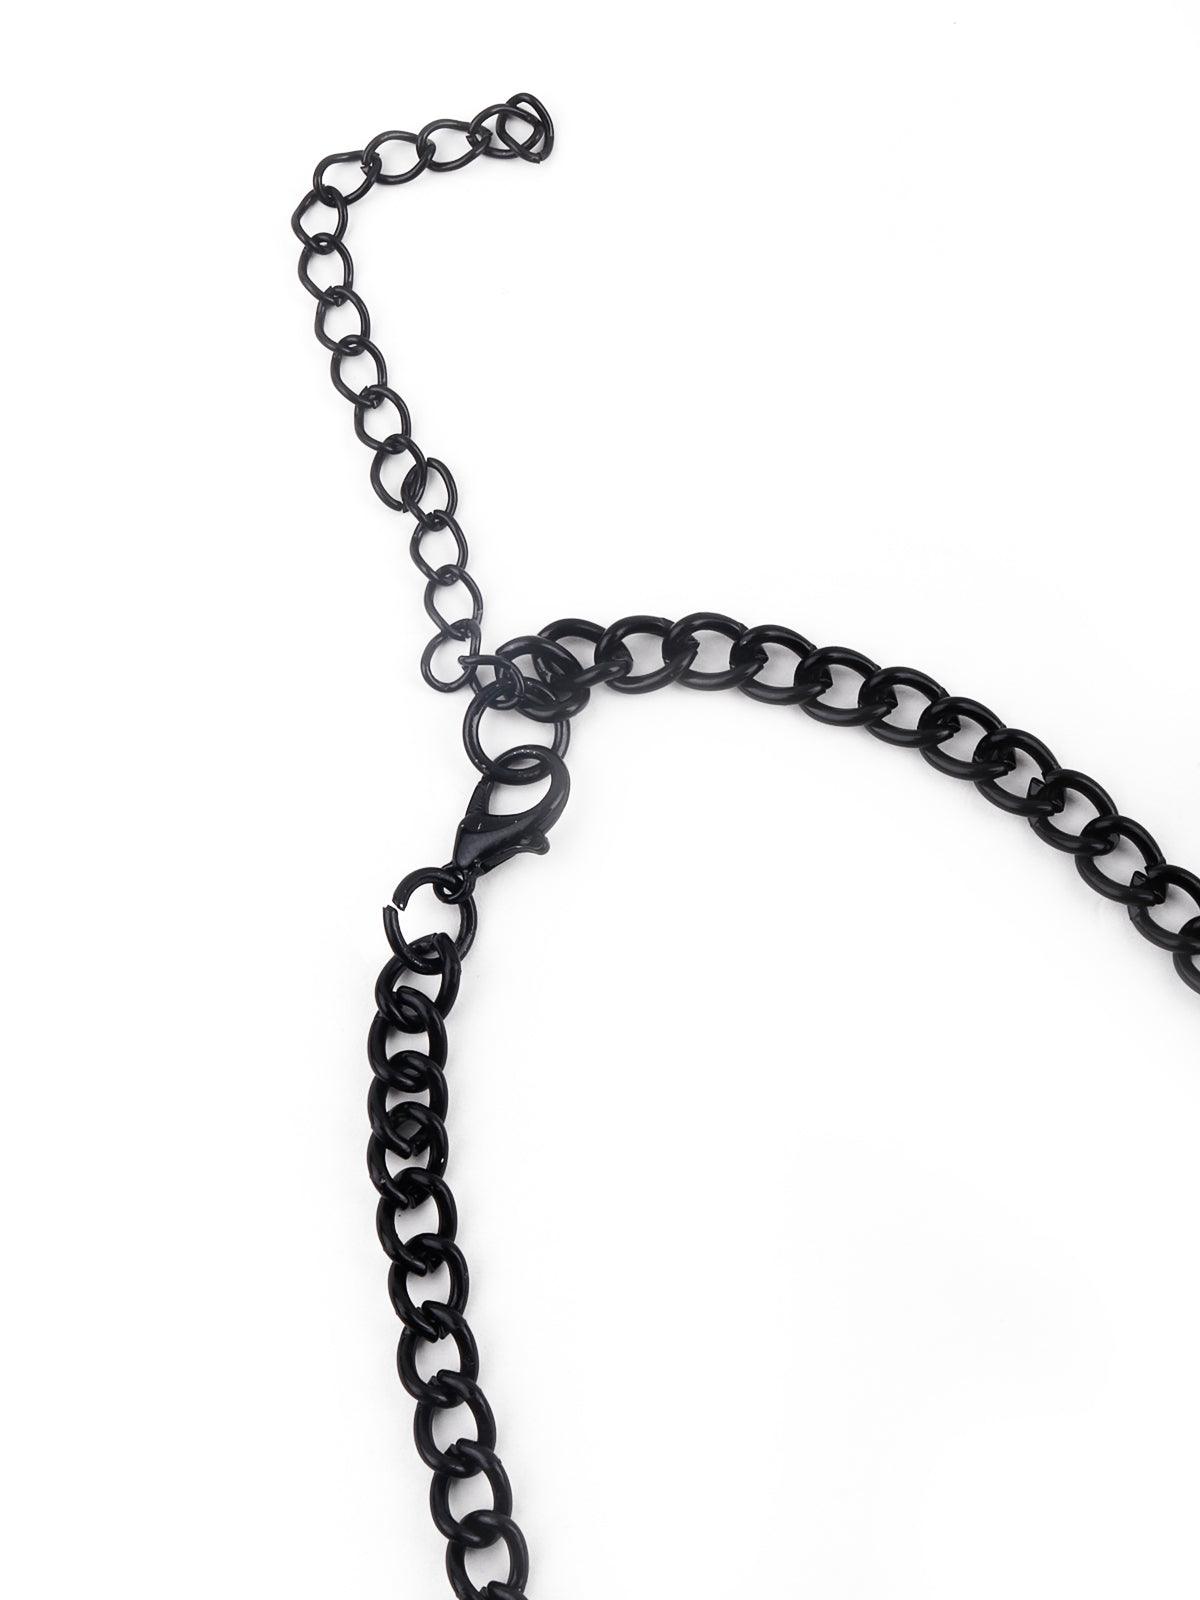 Gorgeous black silhouette necklace for women - Odette